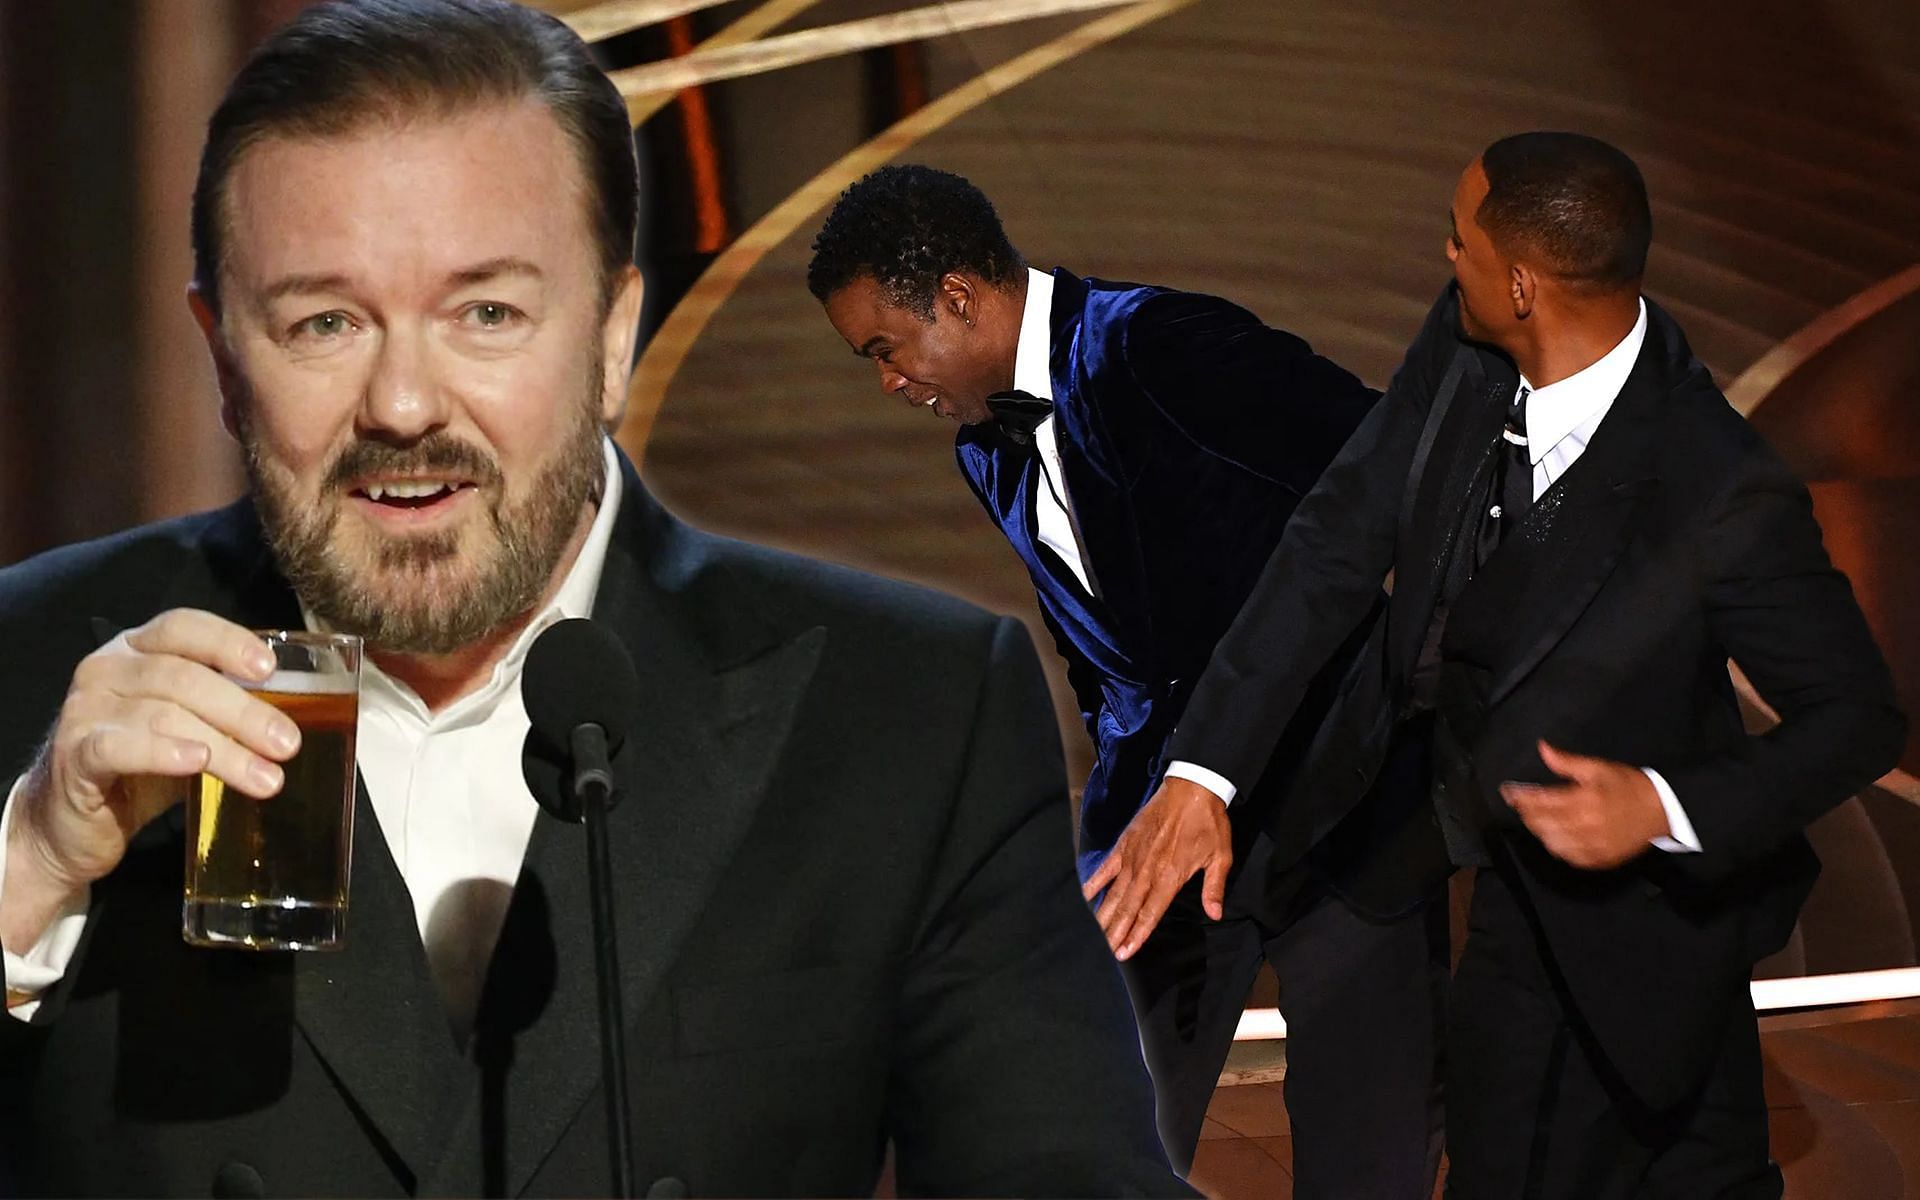 A video clip featuring Chris Rock, Ricky Gervais, and others resurfaced on social media amid Will Smith Oscars 2022 slap controversy (Image via Getty Images)